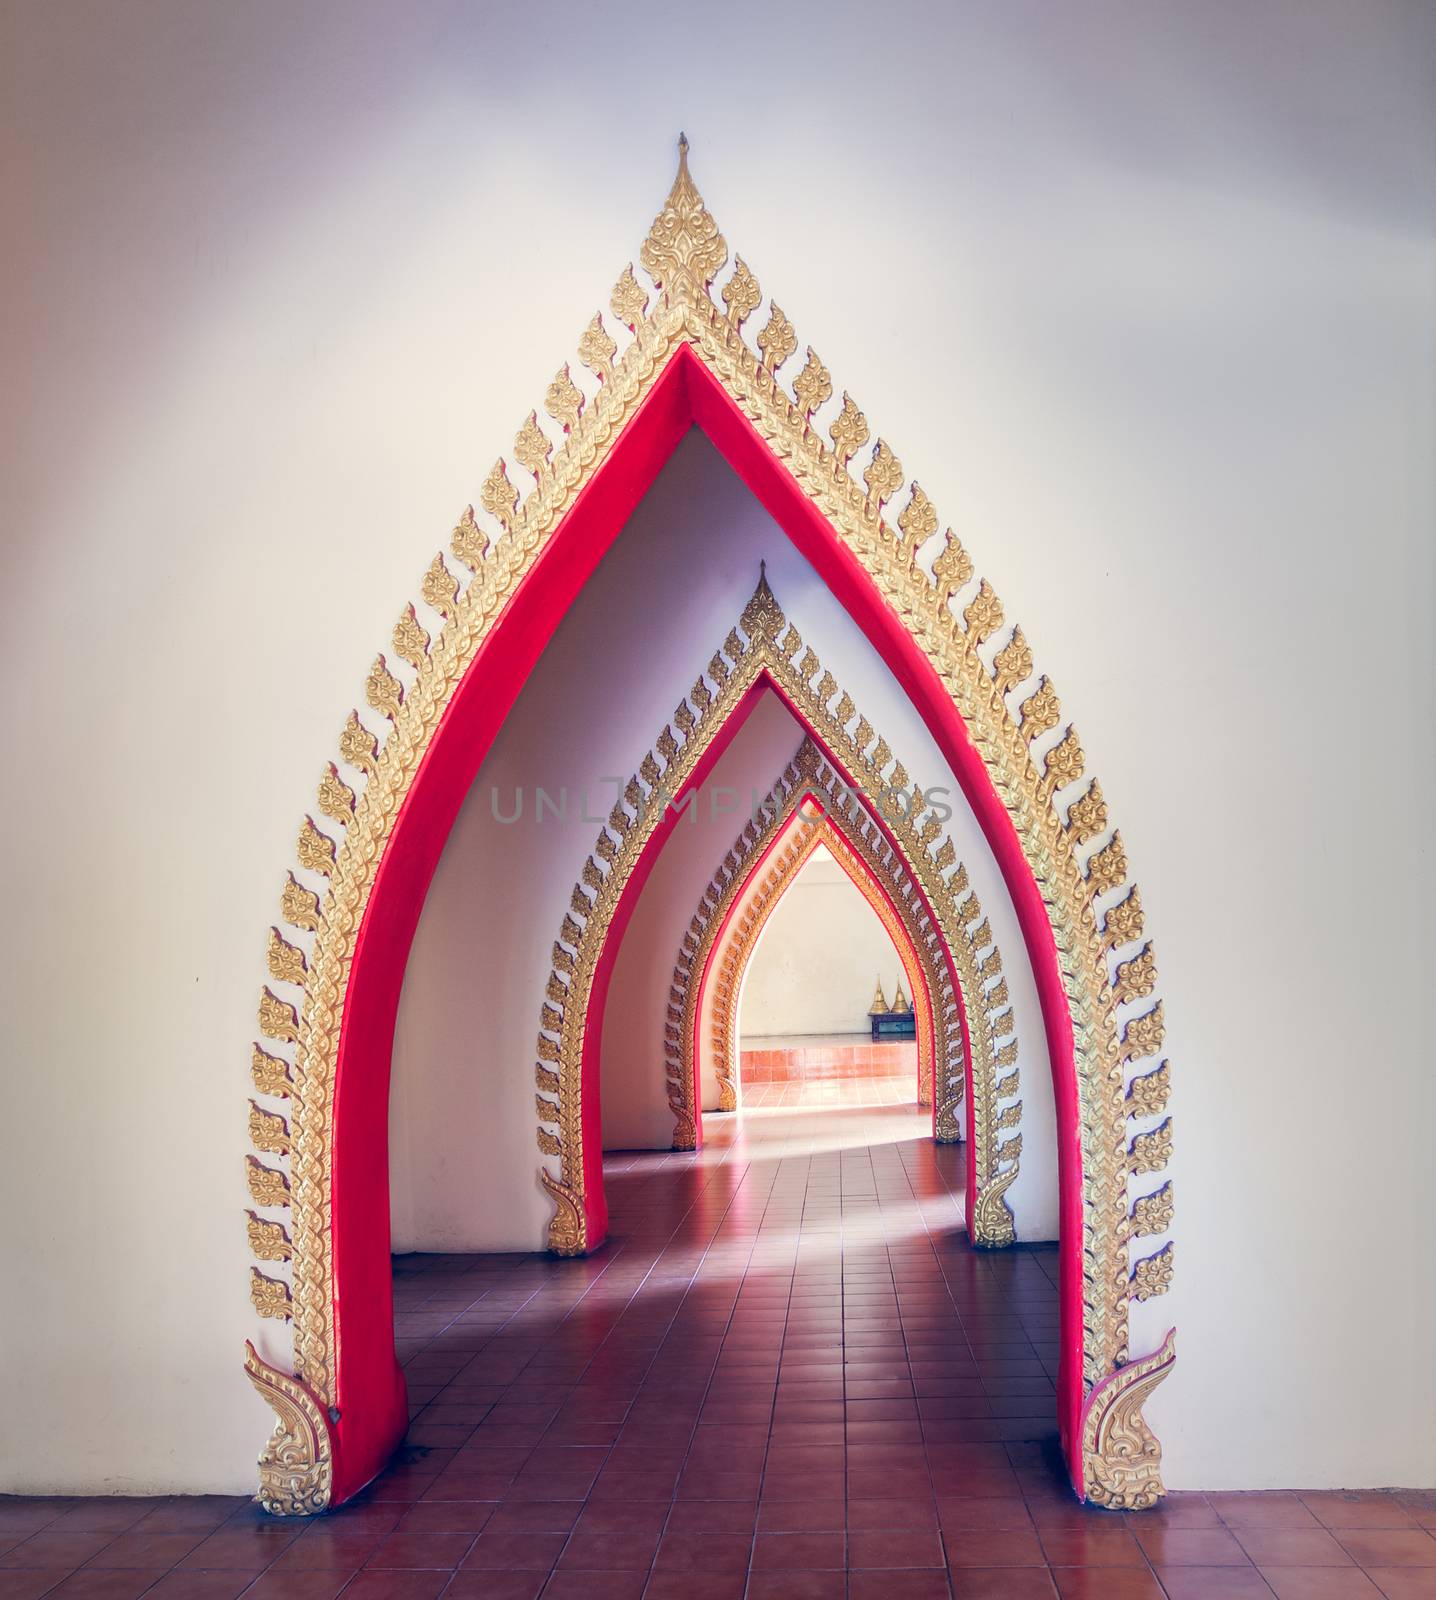 Pathway in Buddhist Temple names "Wat Tham Sua" and "Wat Tham Kh by FrameAngel